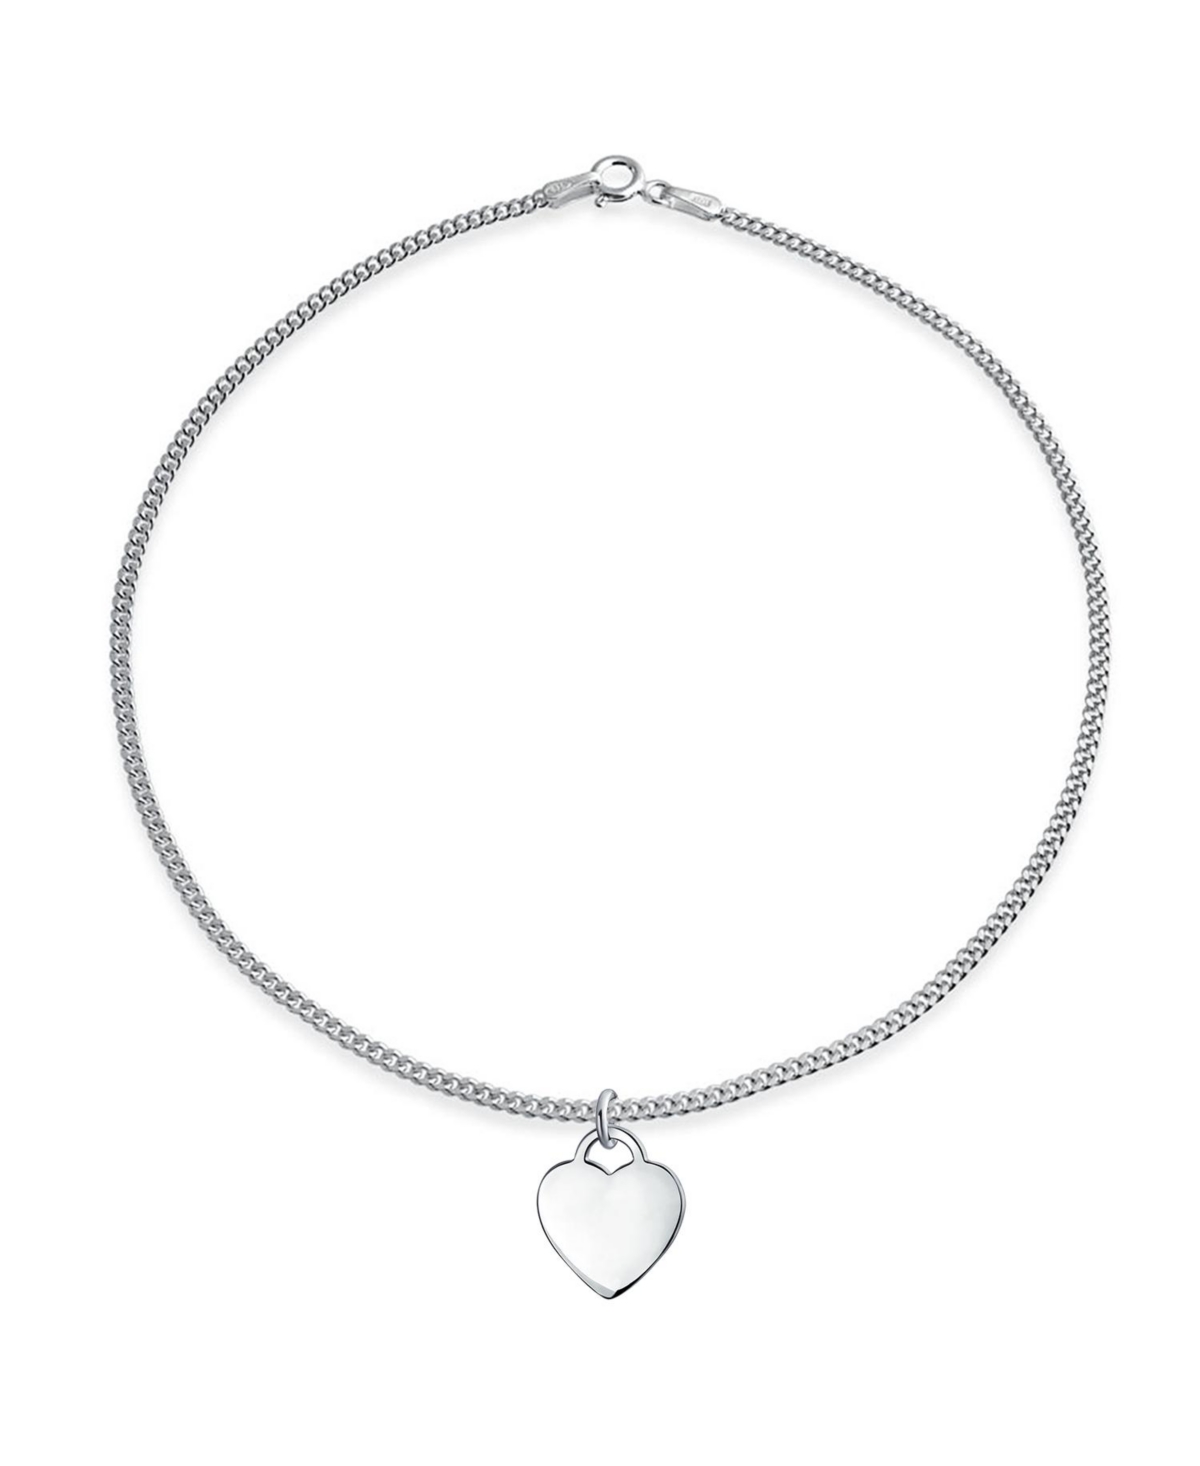 Tiny Delicate Minimalist Blank Flat Heart Anklet For Teen For Women .925 Sterling Silver 9 Inch Custom Engrave - Silver